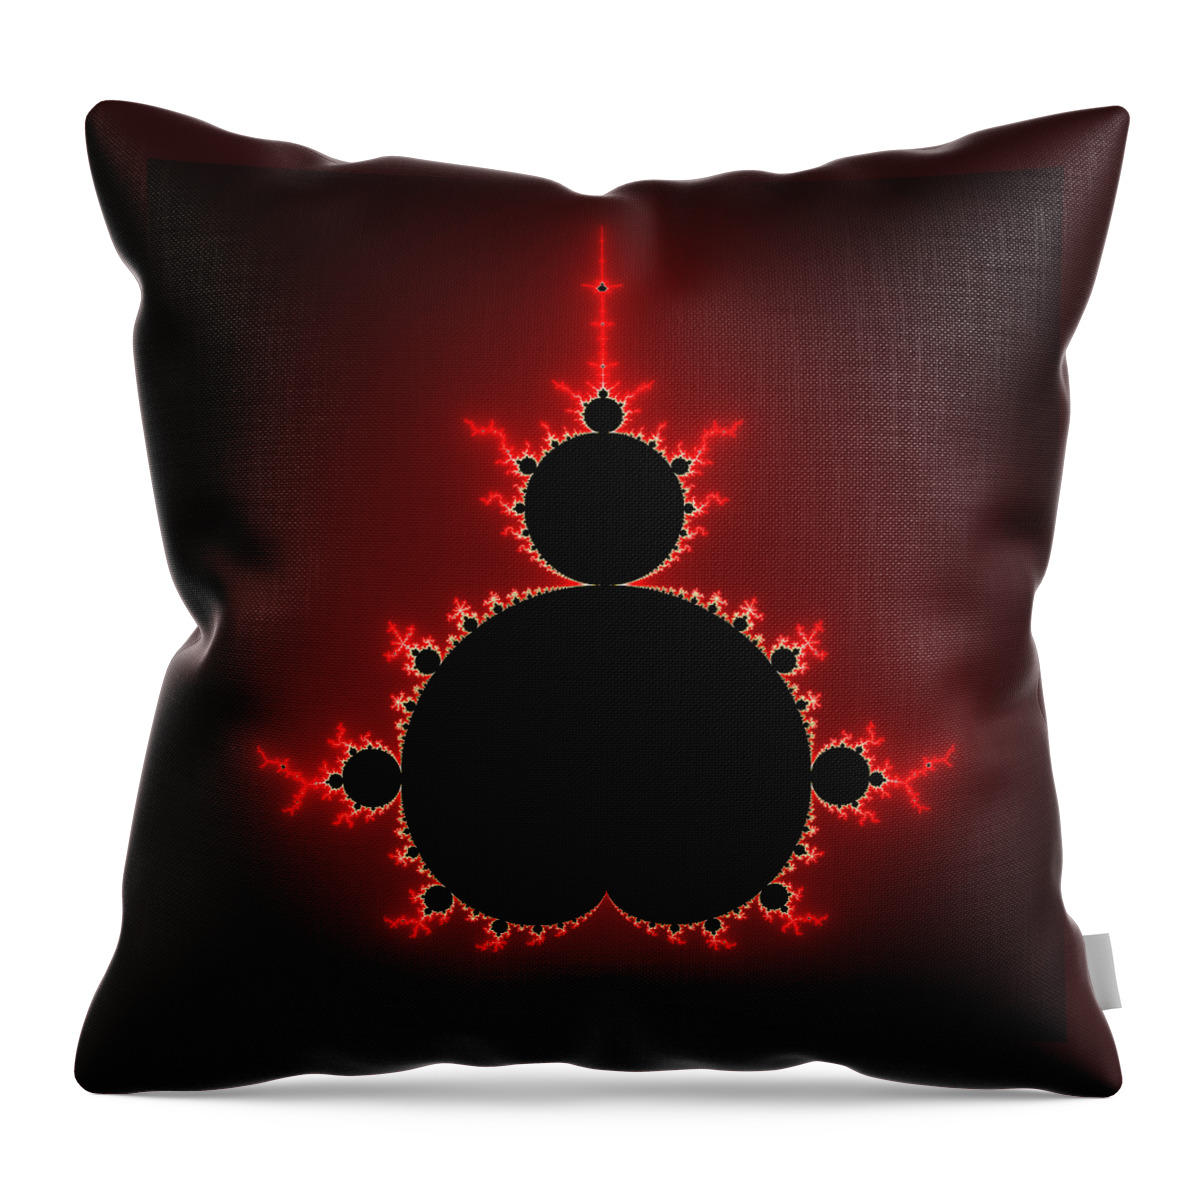 Mandelbrot Throw Pillow featuring the digital art Mandelbrot set black and red square format by Matthias Hauser